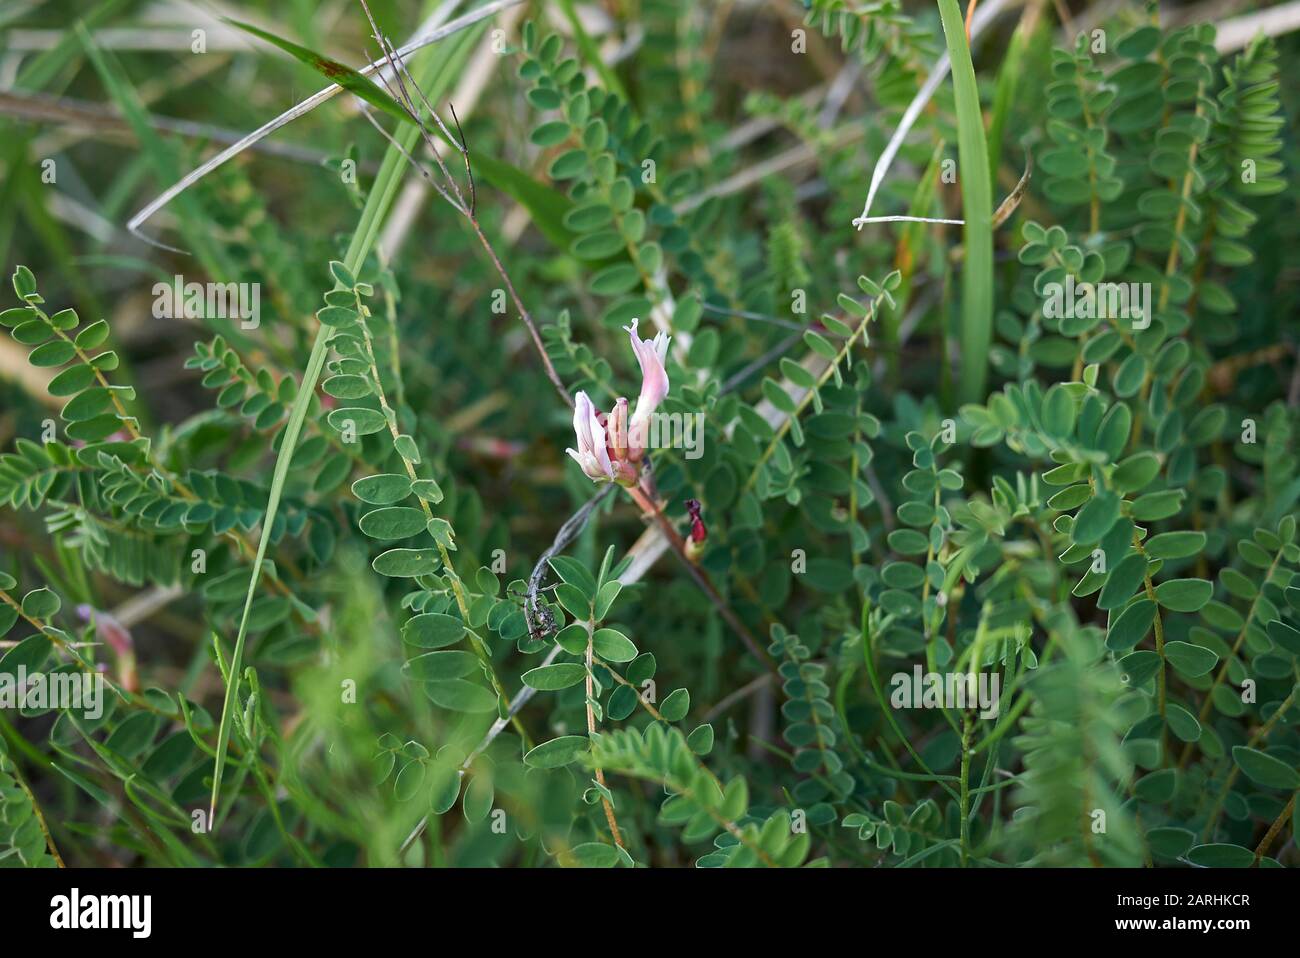 fresh flower and seed pods of Astragalus monspessulanus plant Stock Photo